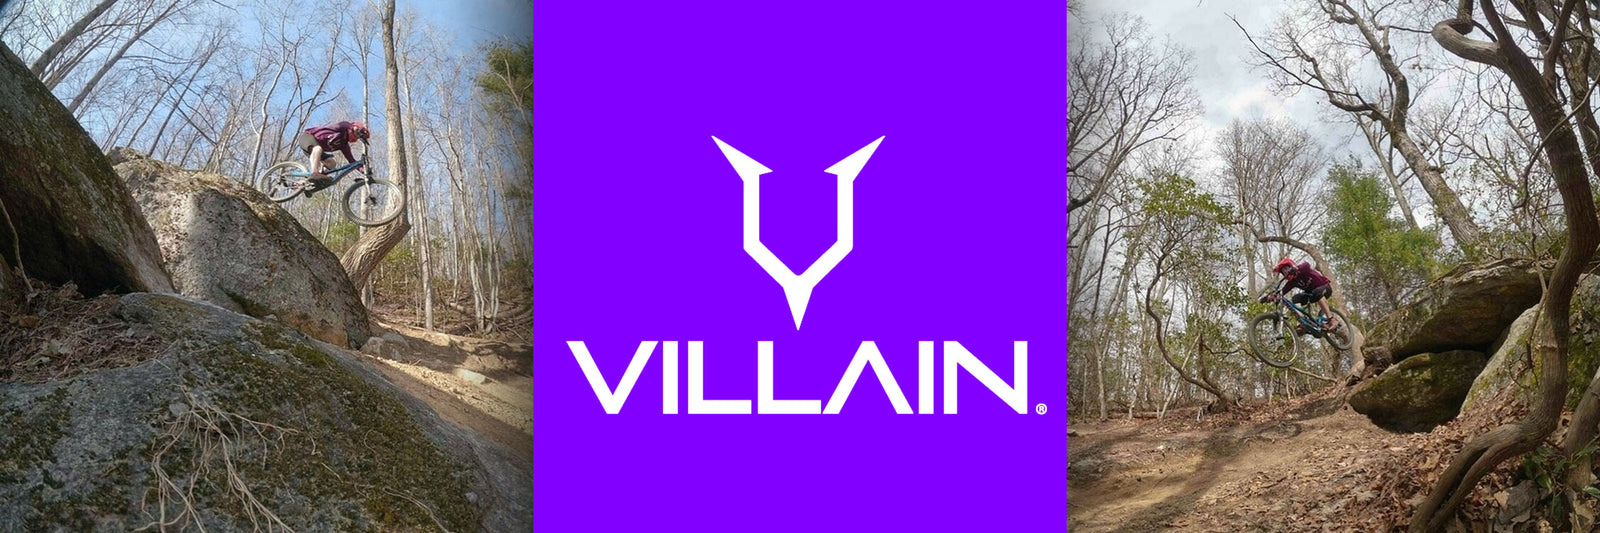 ☠️ Claim the trails with Villain! Best MTB & BMX Accessories & Components for Adventure Riders